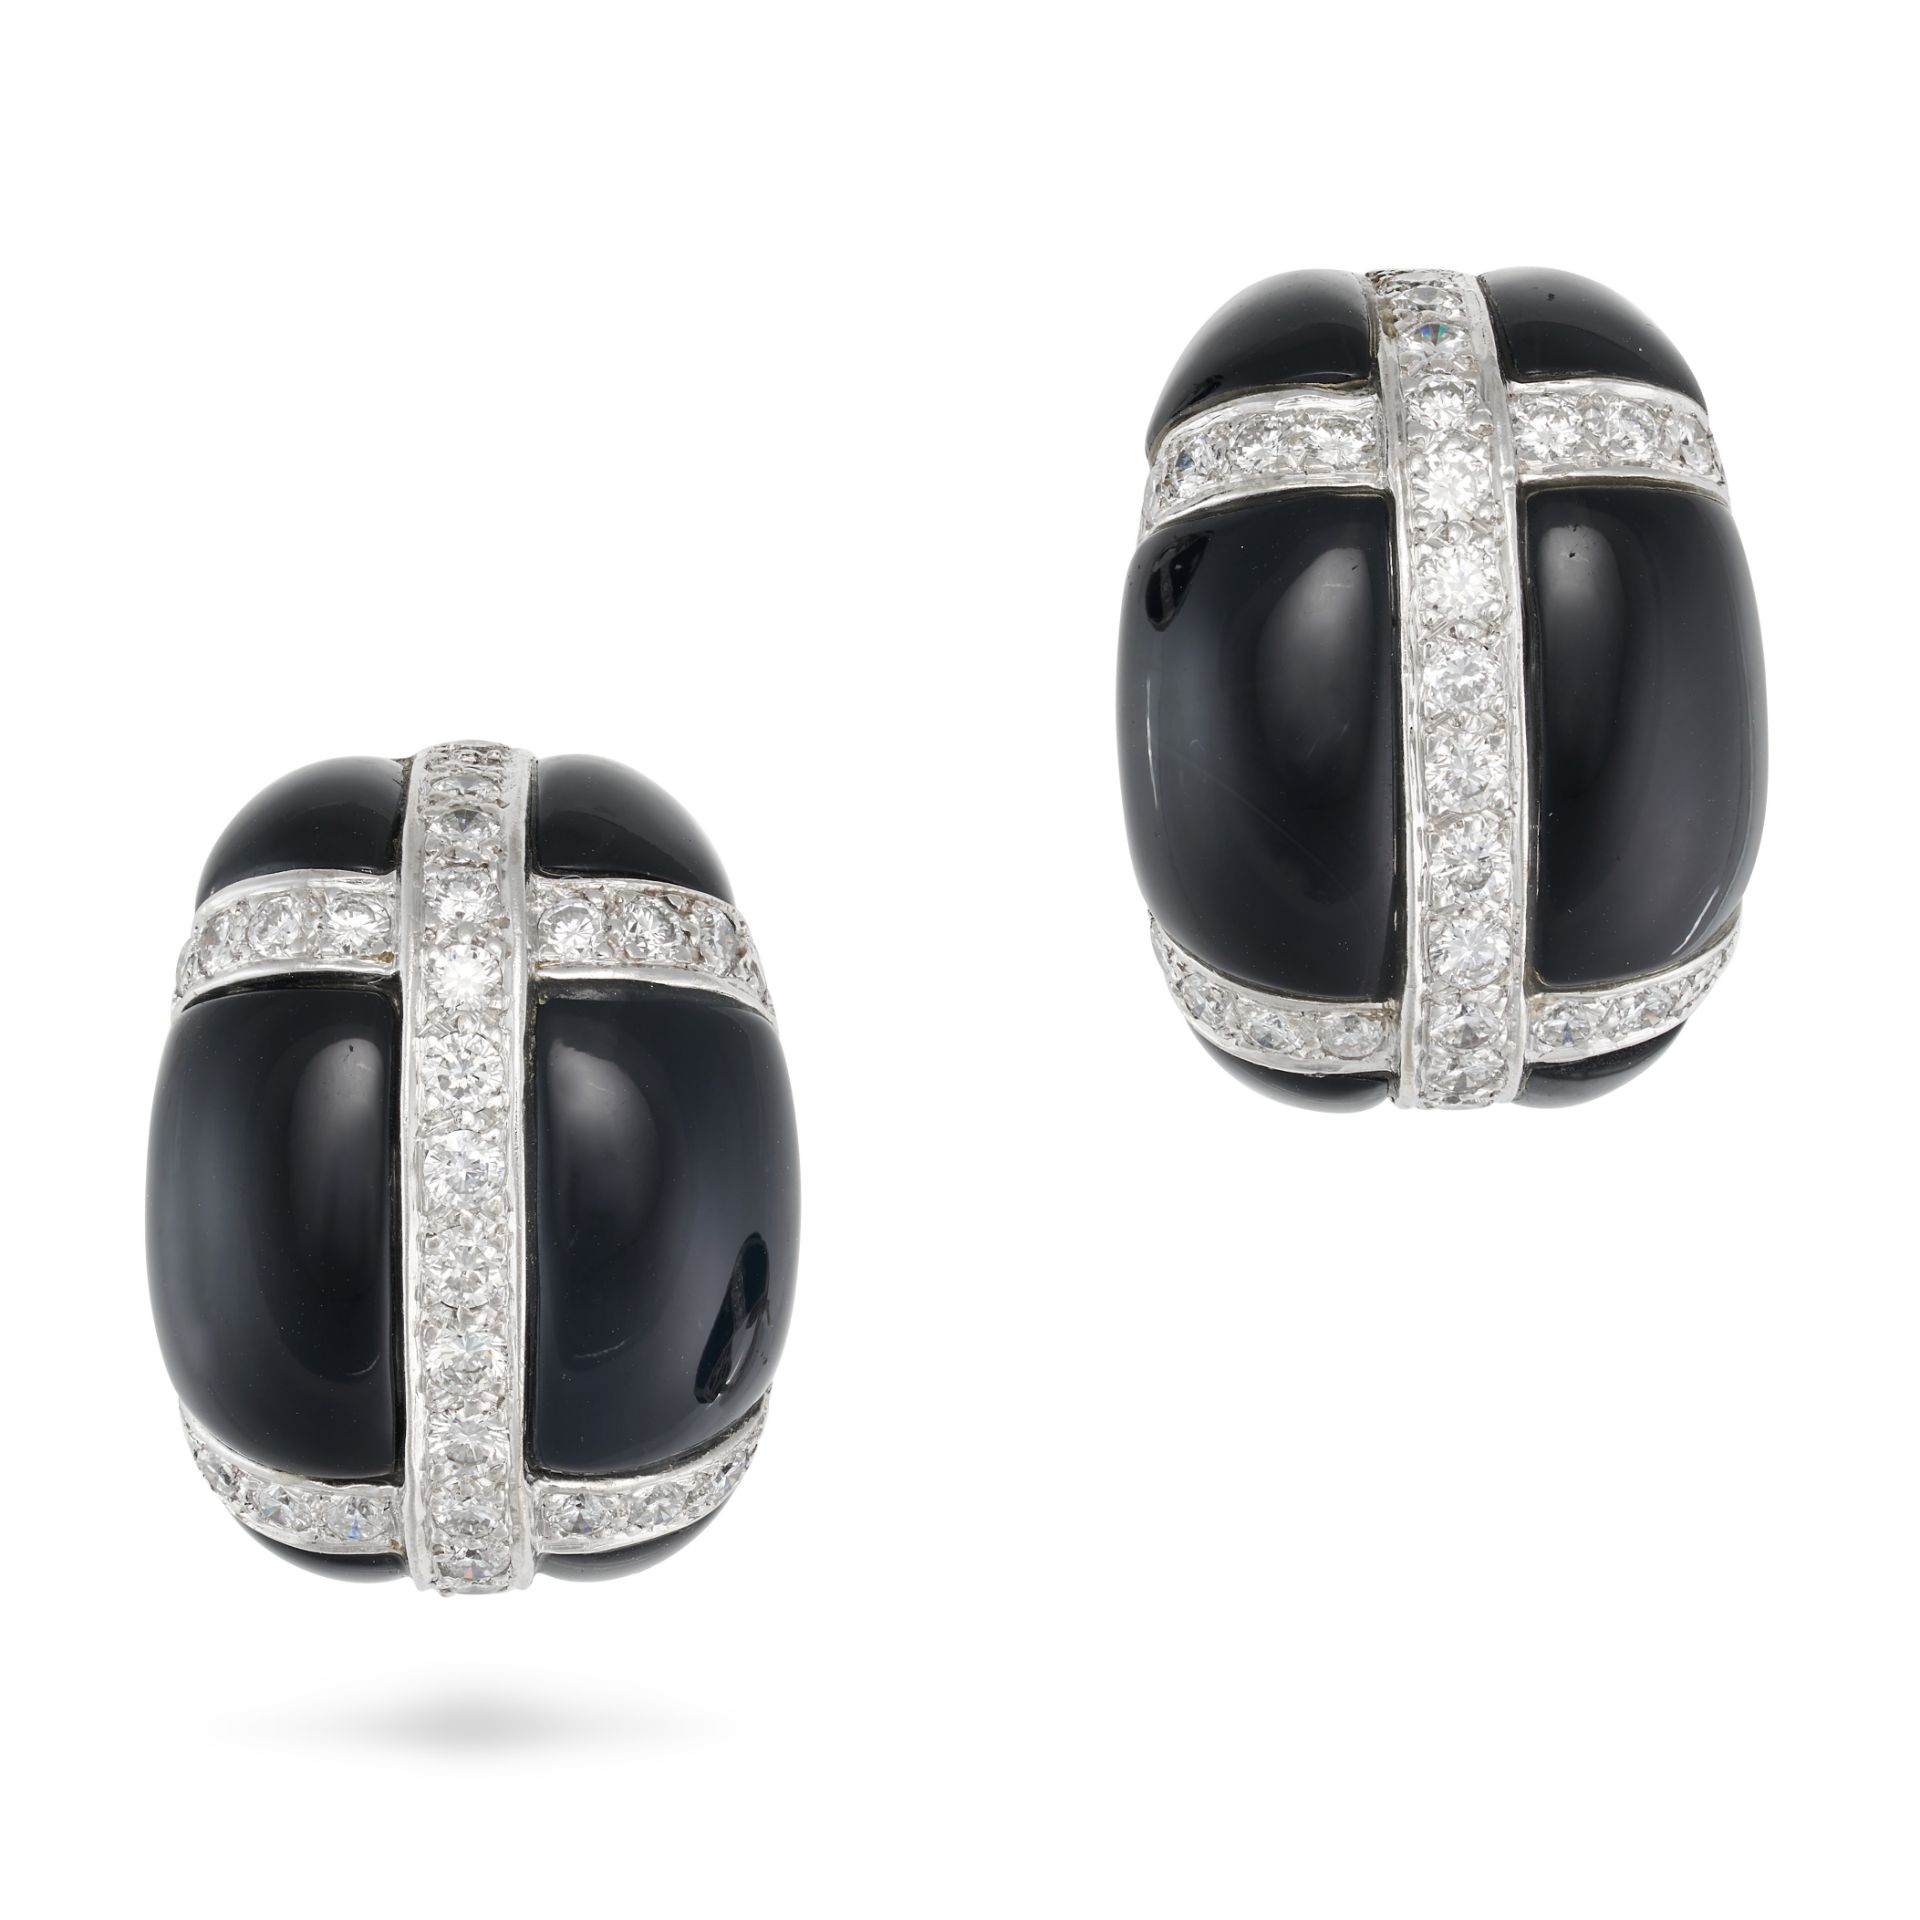 A PAIR OF ITALIAN ONYX AND DIAMOND EARRINGS in 18ct white gold, of modernist design with applied ...